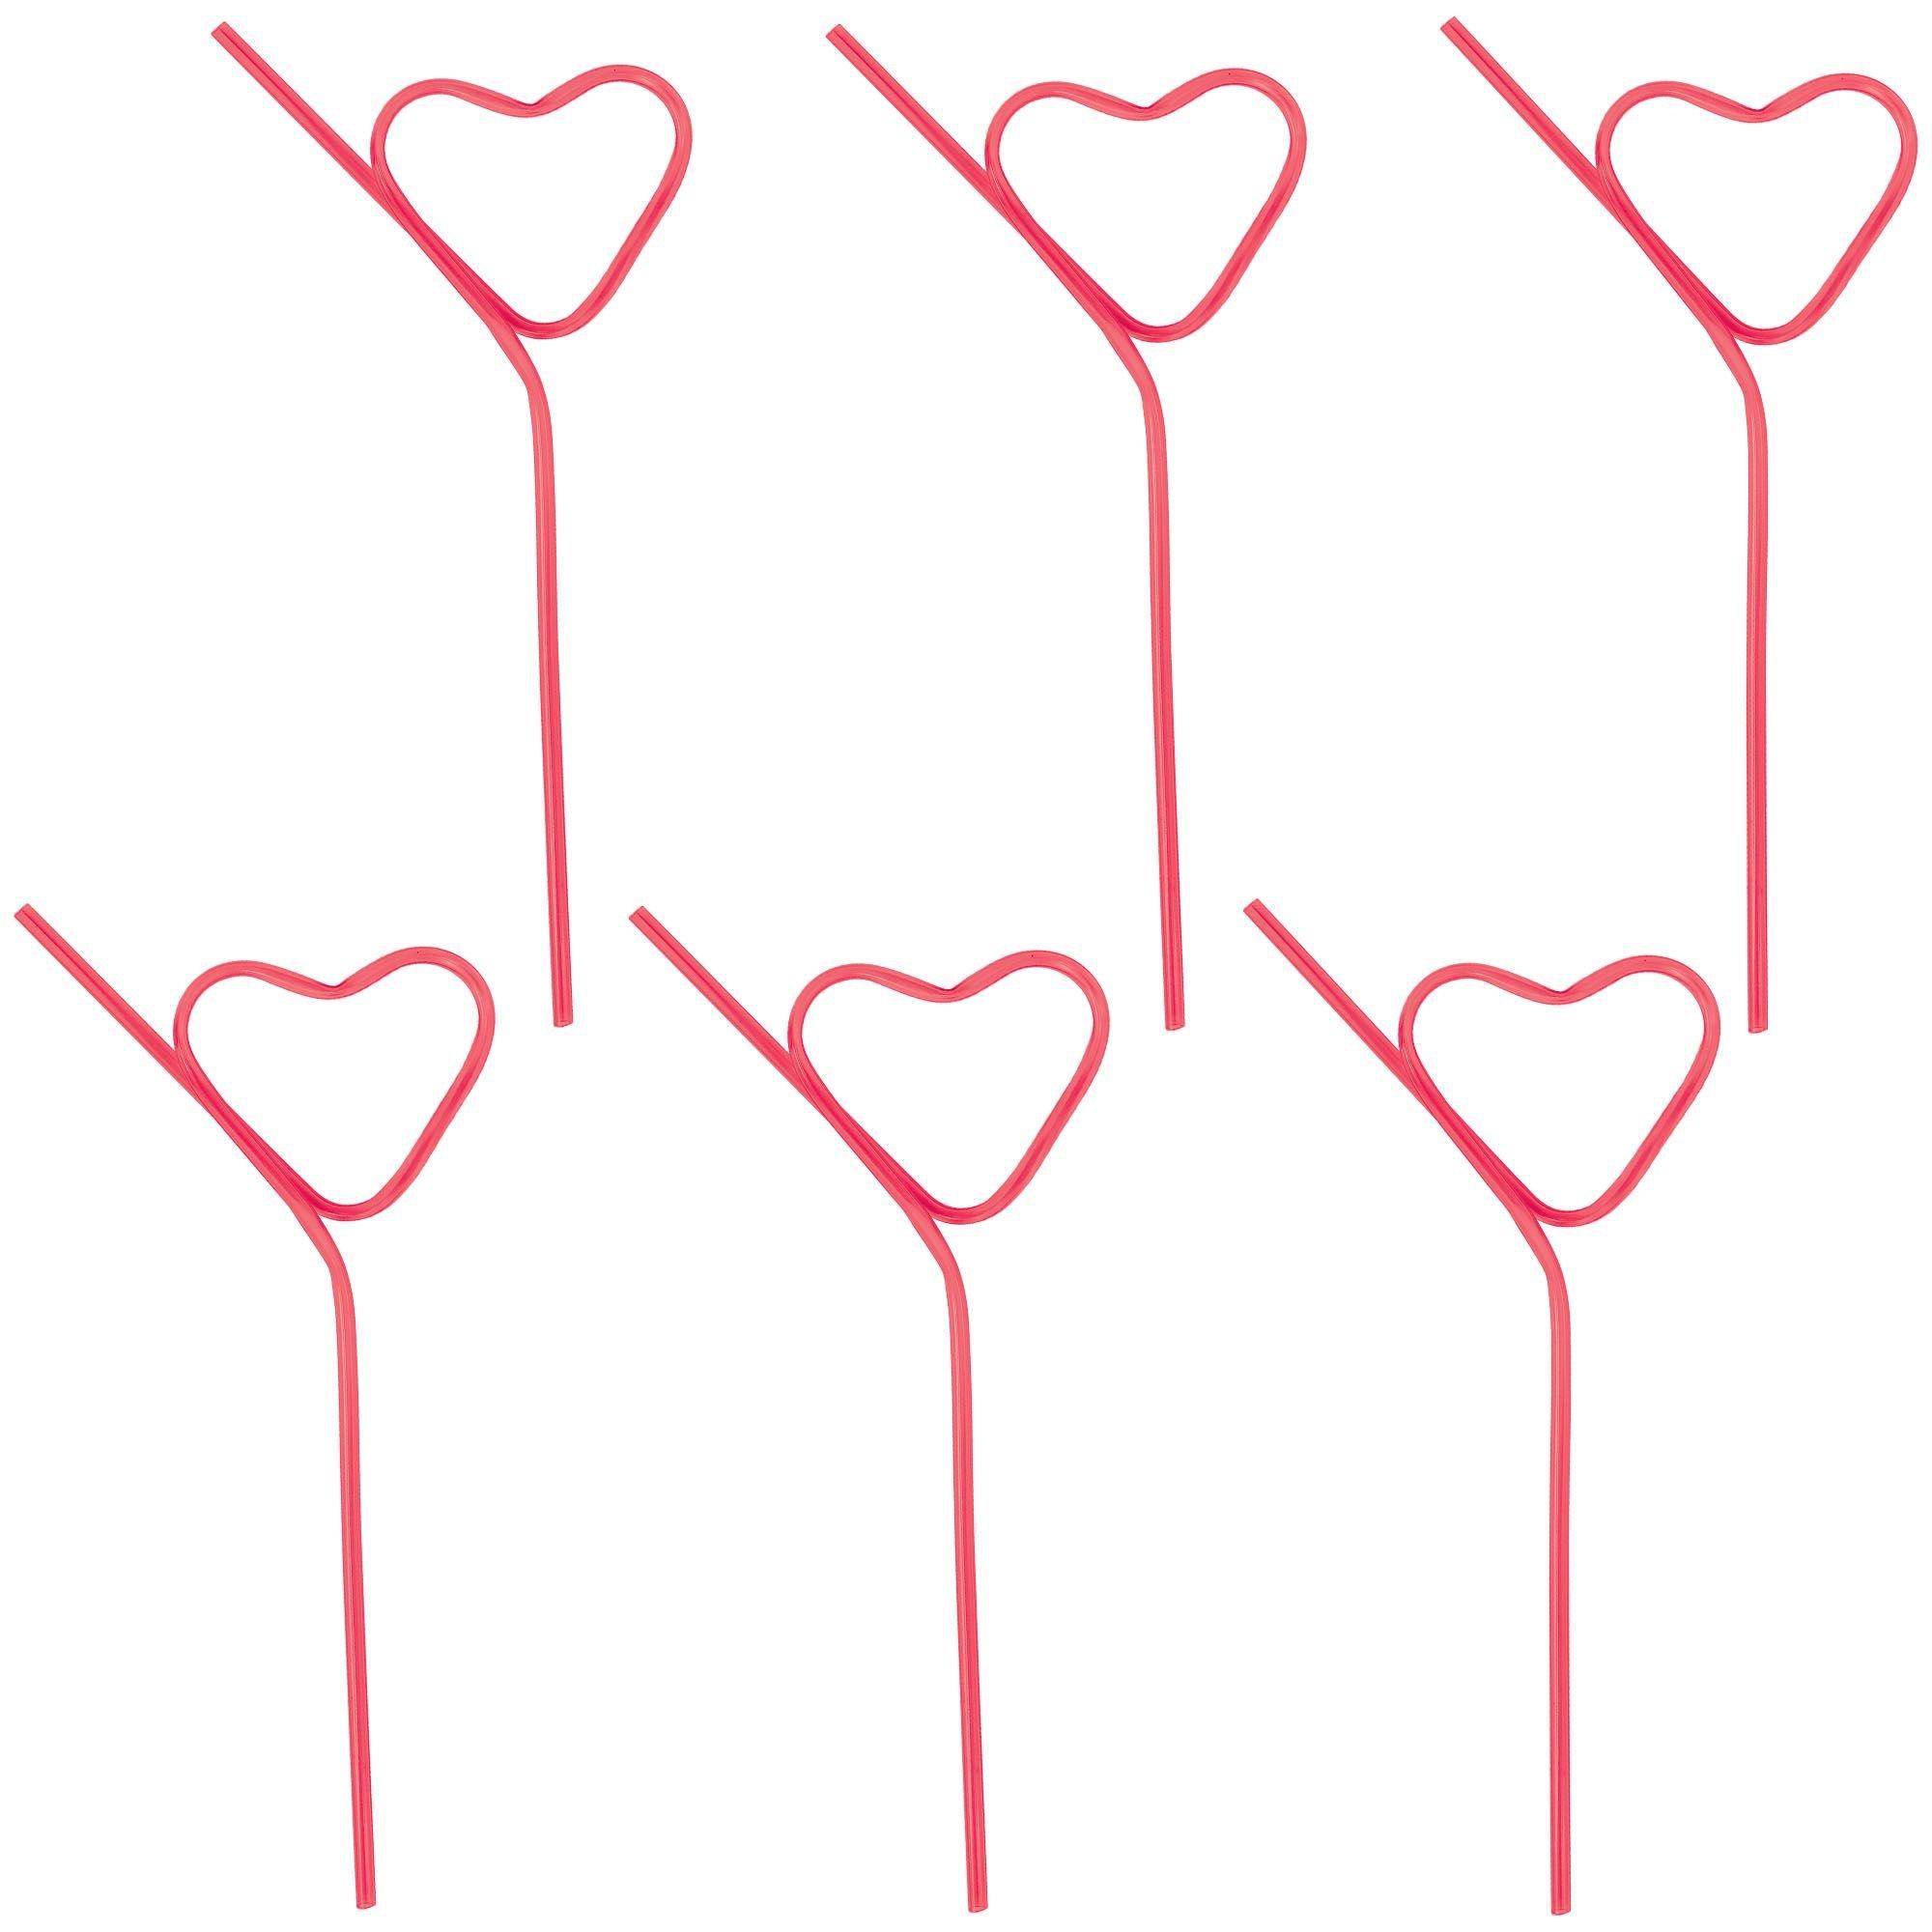 Heart Shape Straw Photos and Images